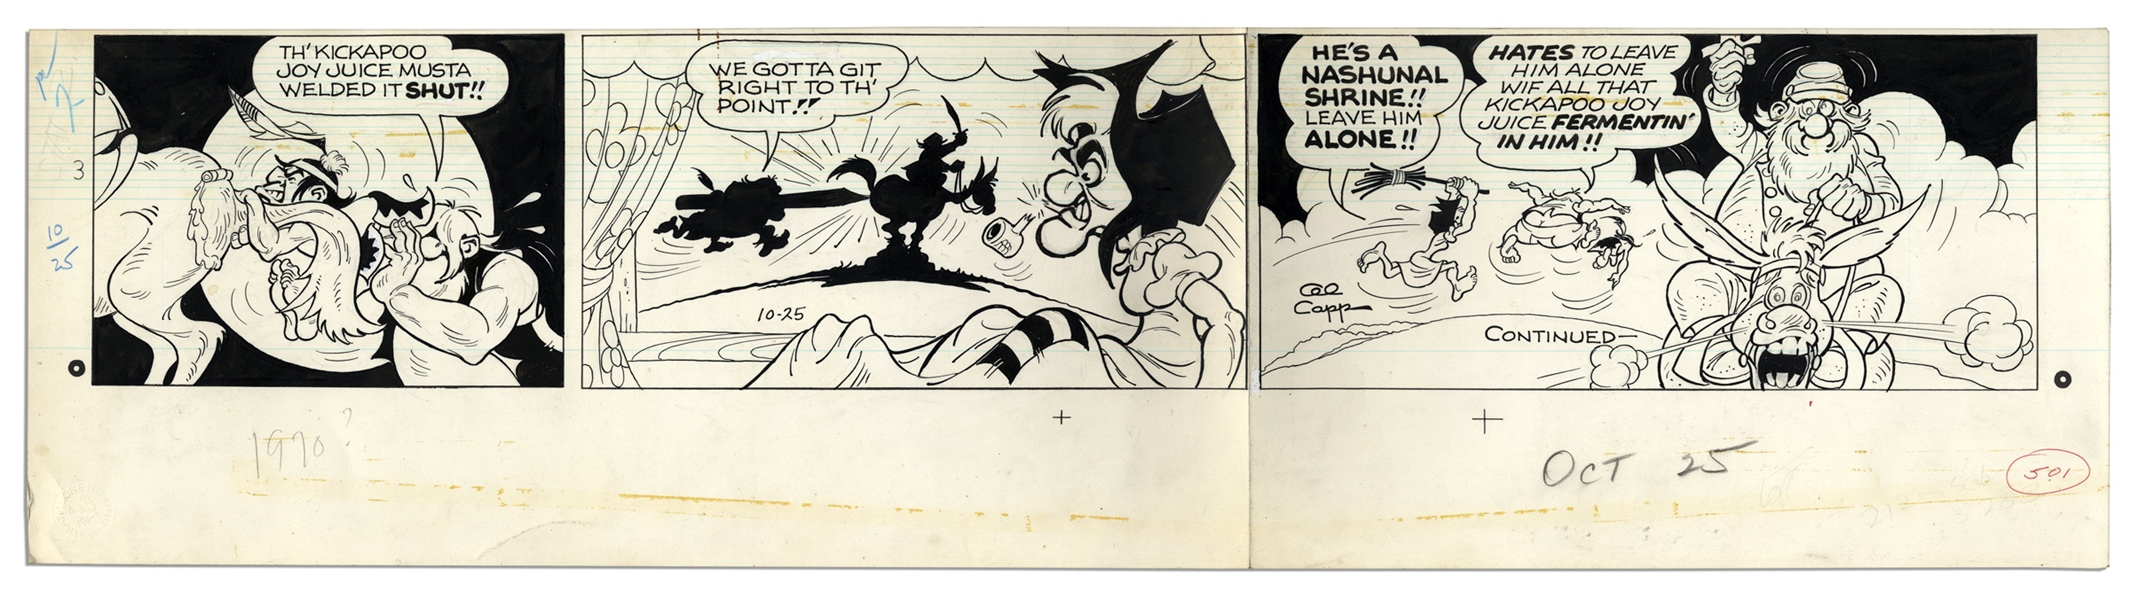 ''Li'l Abner'' Sunday Strip Hand-Drawn & Signed by Al Capp From 25 October 1970 -- Mammy, Hairless Joe & Lonesome Polecat -- 29'' x 7.5'' -- Very Good Plus -- From the Al Capp Estate